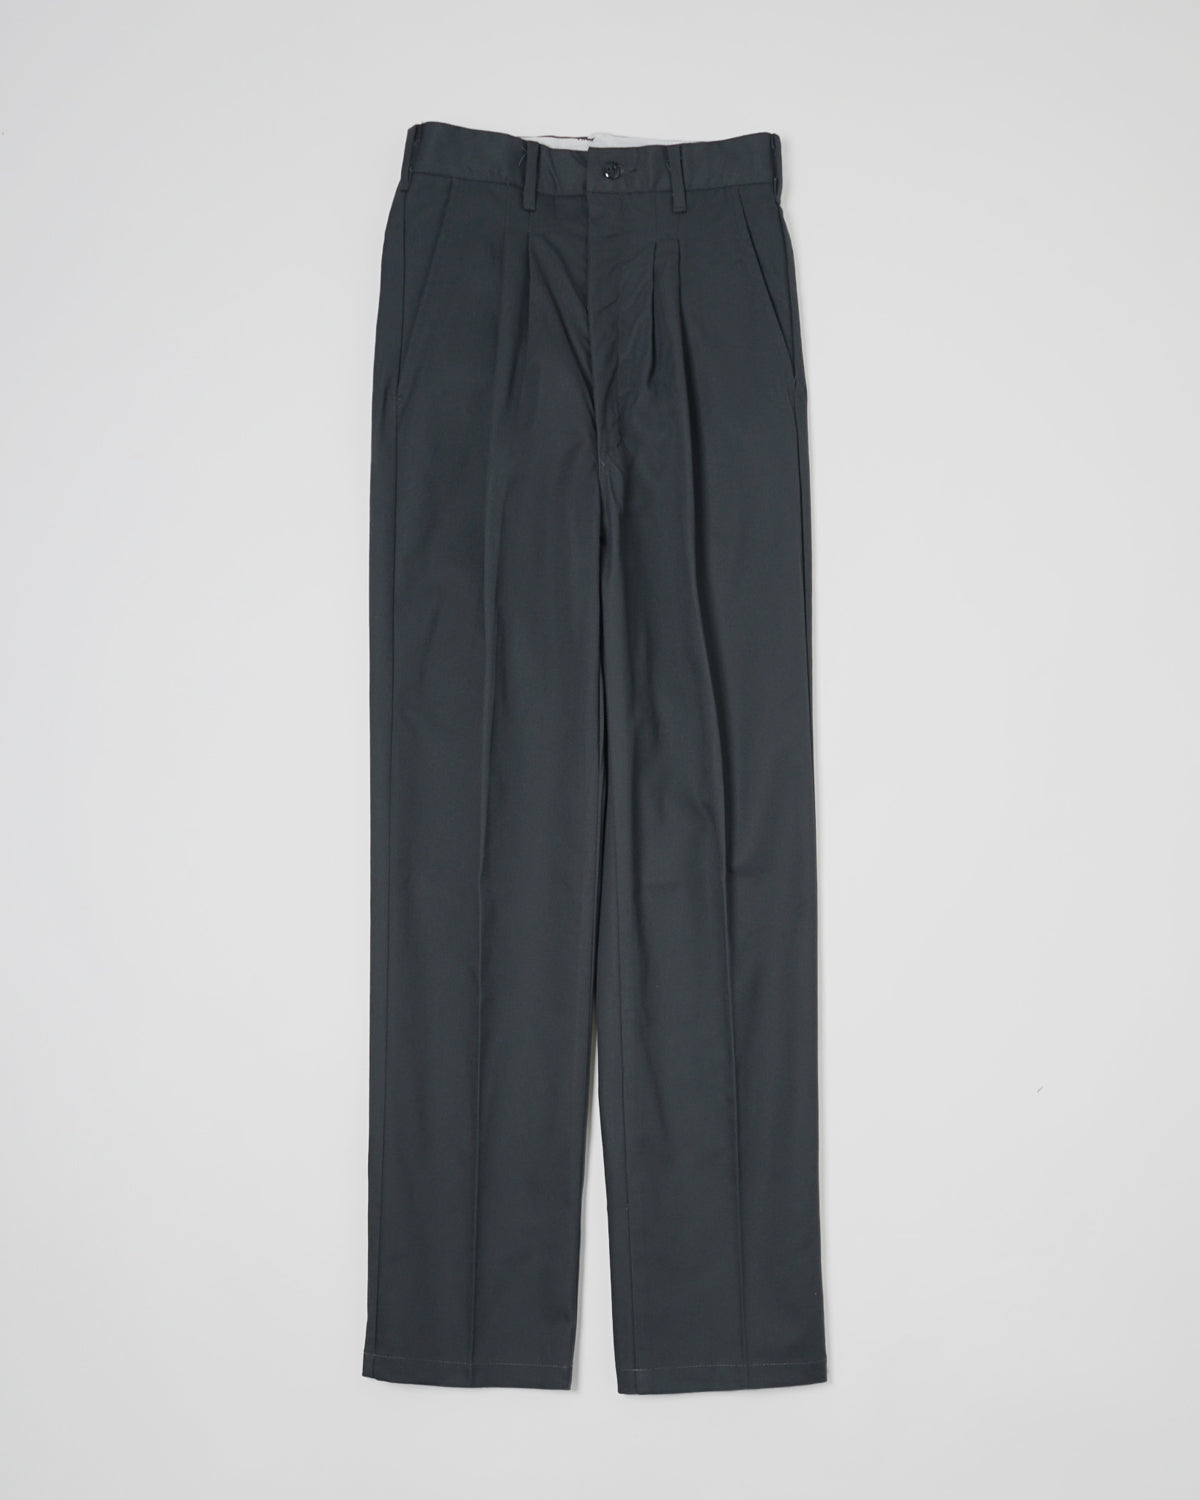 Tucked Work Trousers / Gray